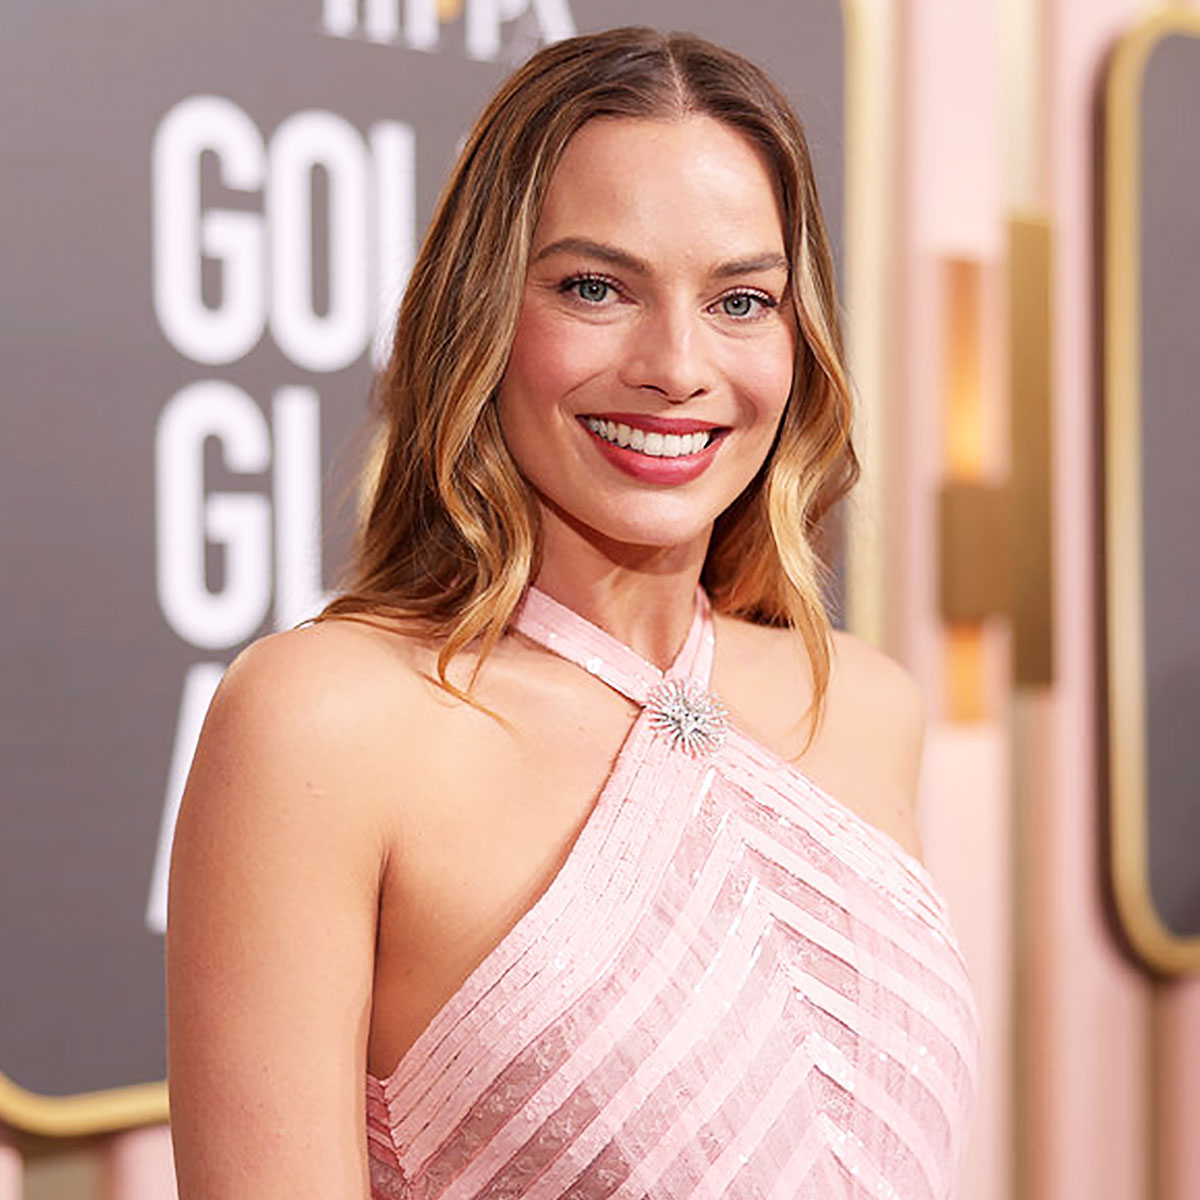 Margot Robbie's Barbie Red Carpet Makeup Was Thanks to My Go-To